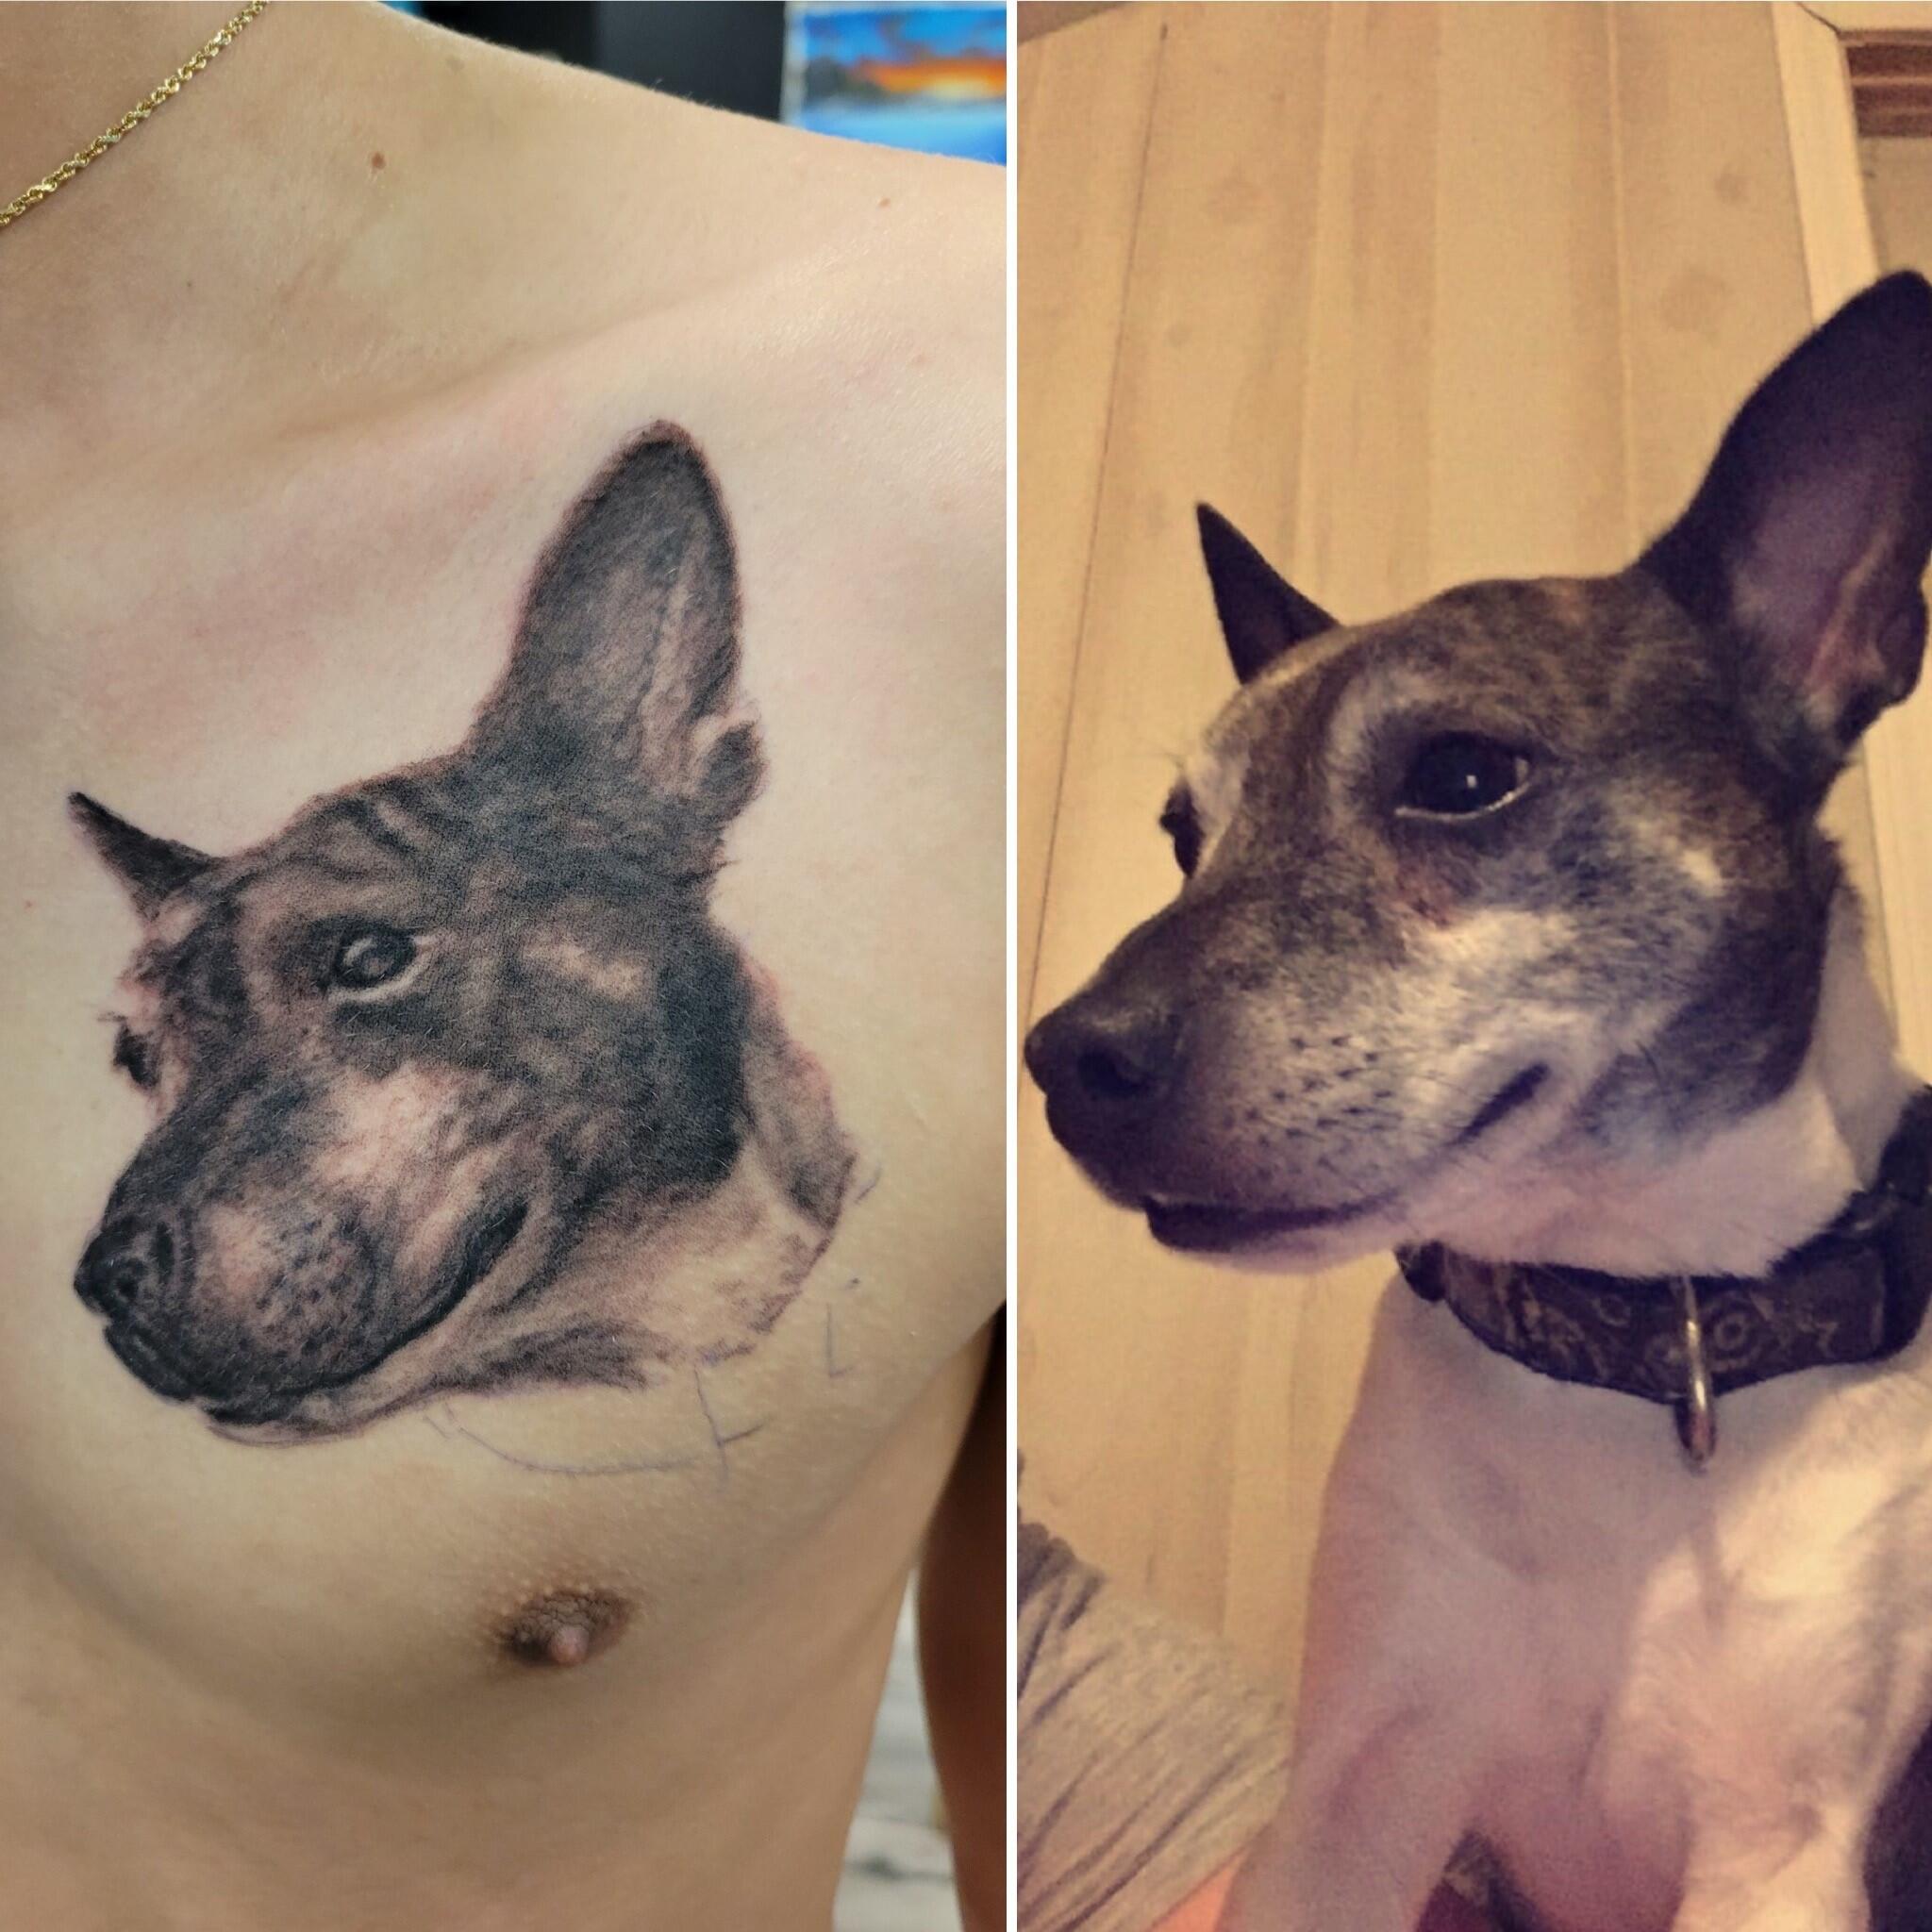 7 Totally Weird But Normal Things That Happen To Tattoos